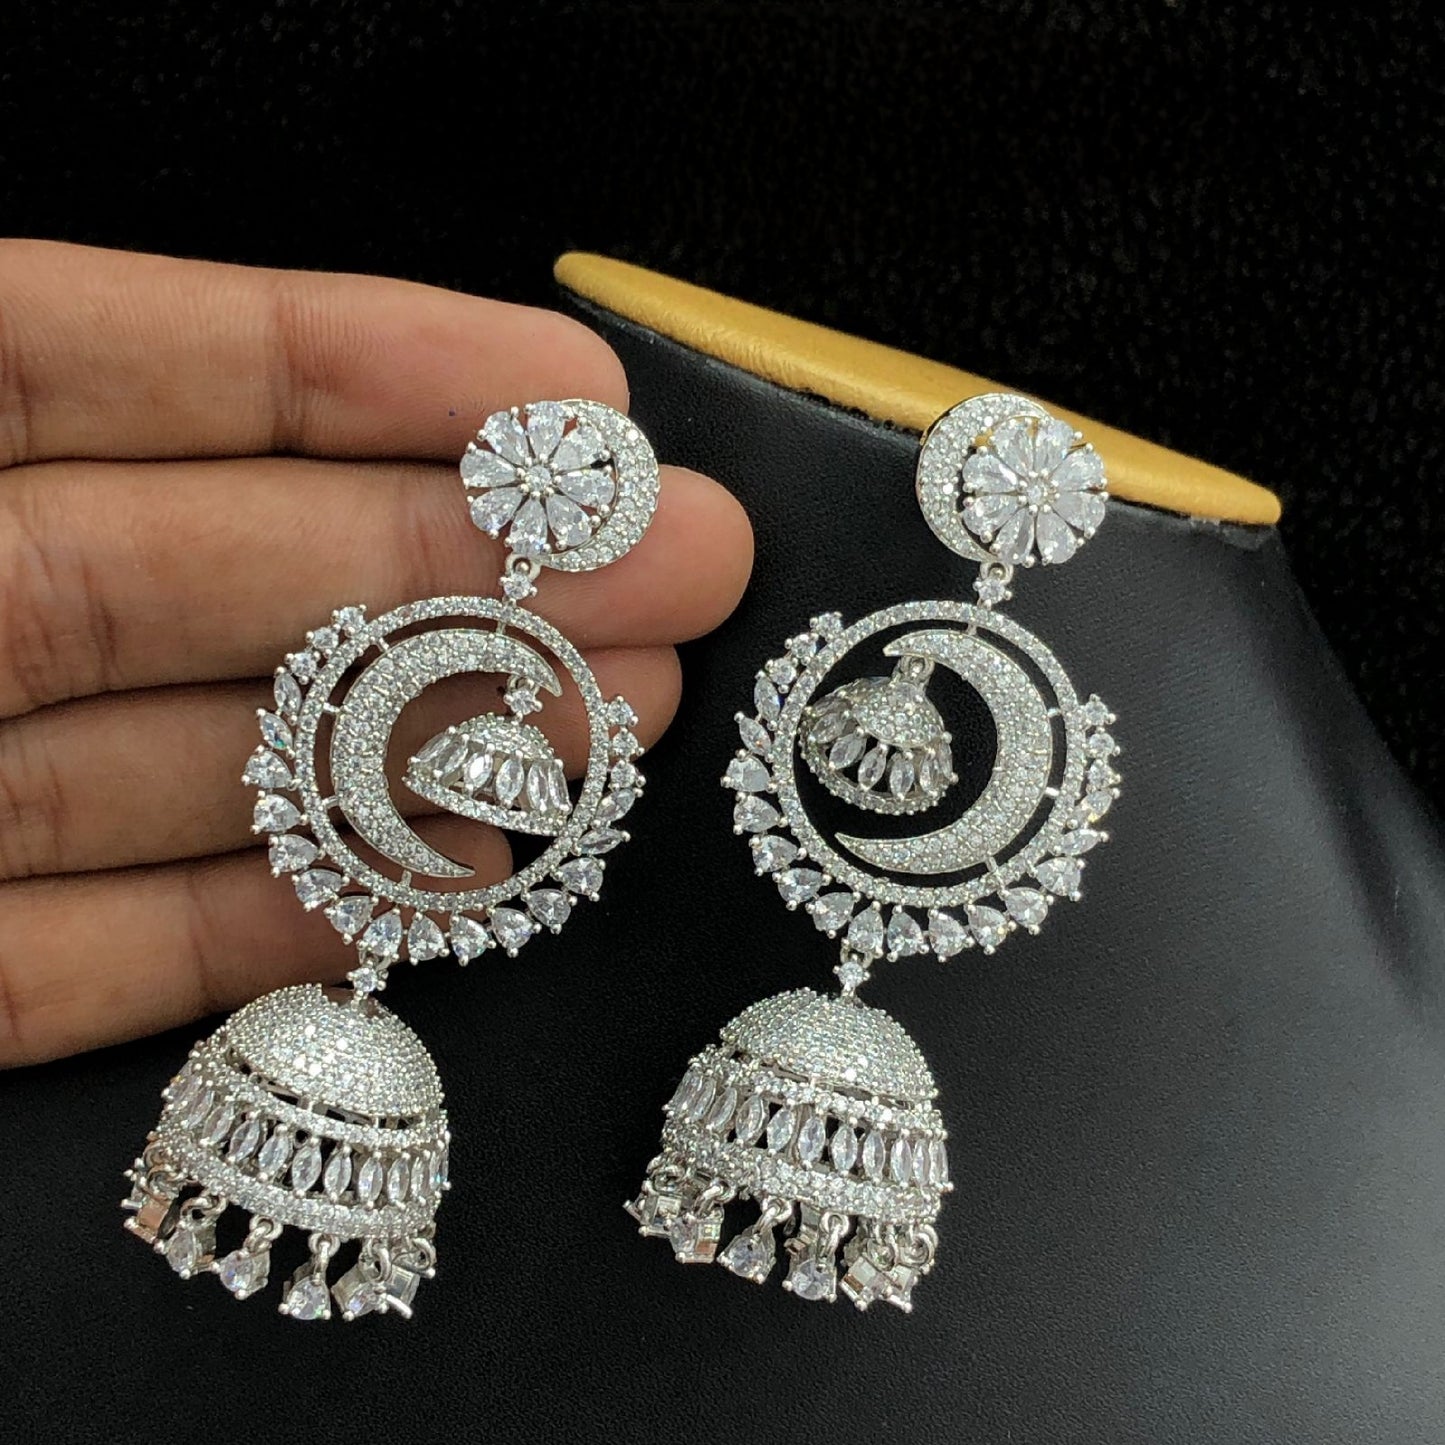 IndianDesignz Baby Pink American Diamond Wedding Jewelry in Silver Finish | Bollywood Trendy Fashion